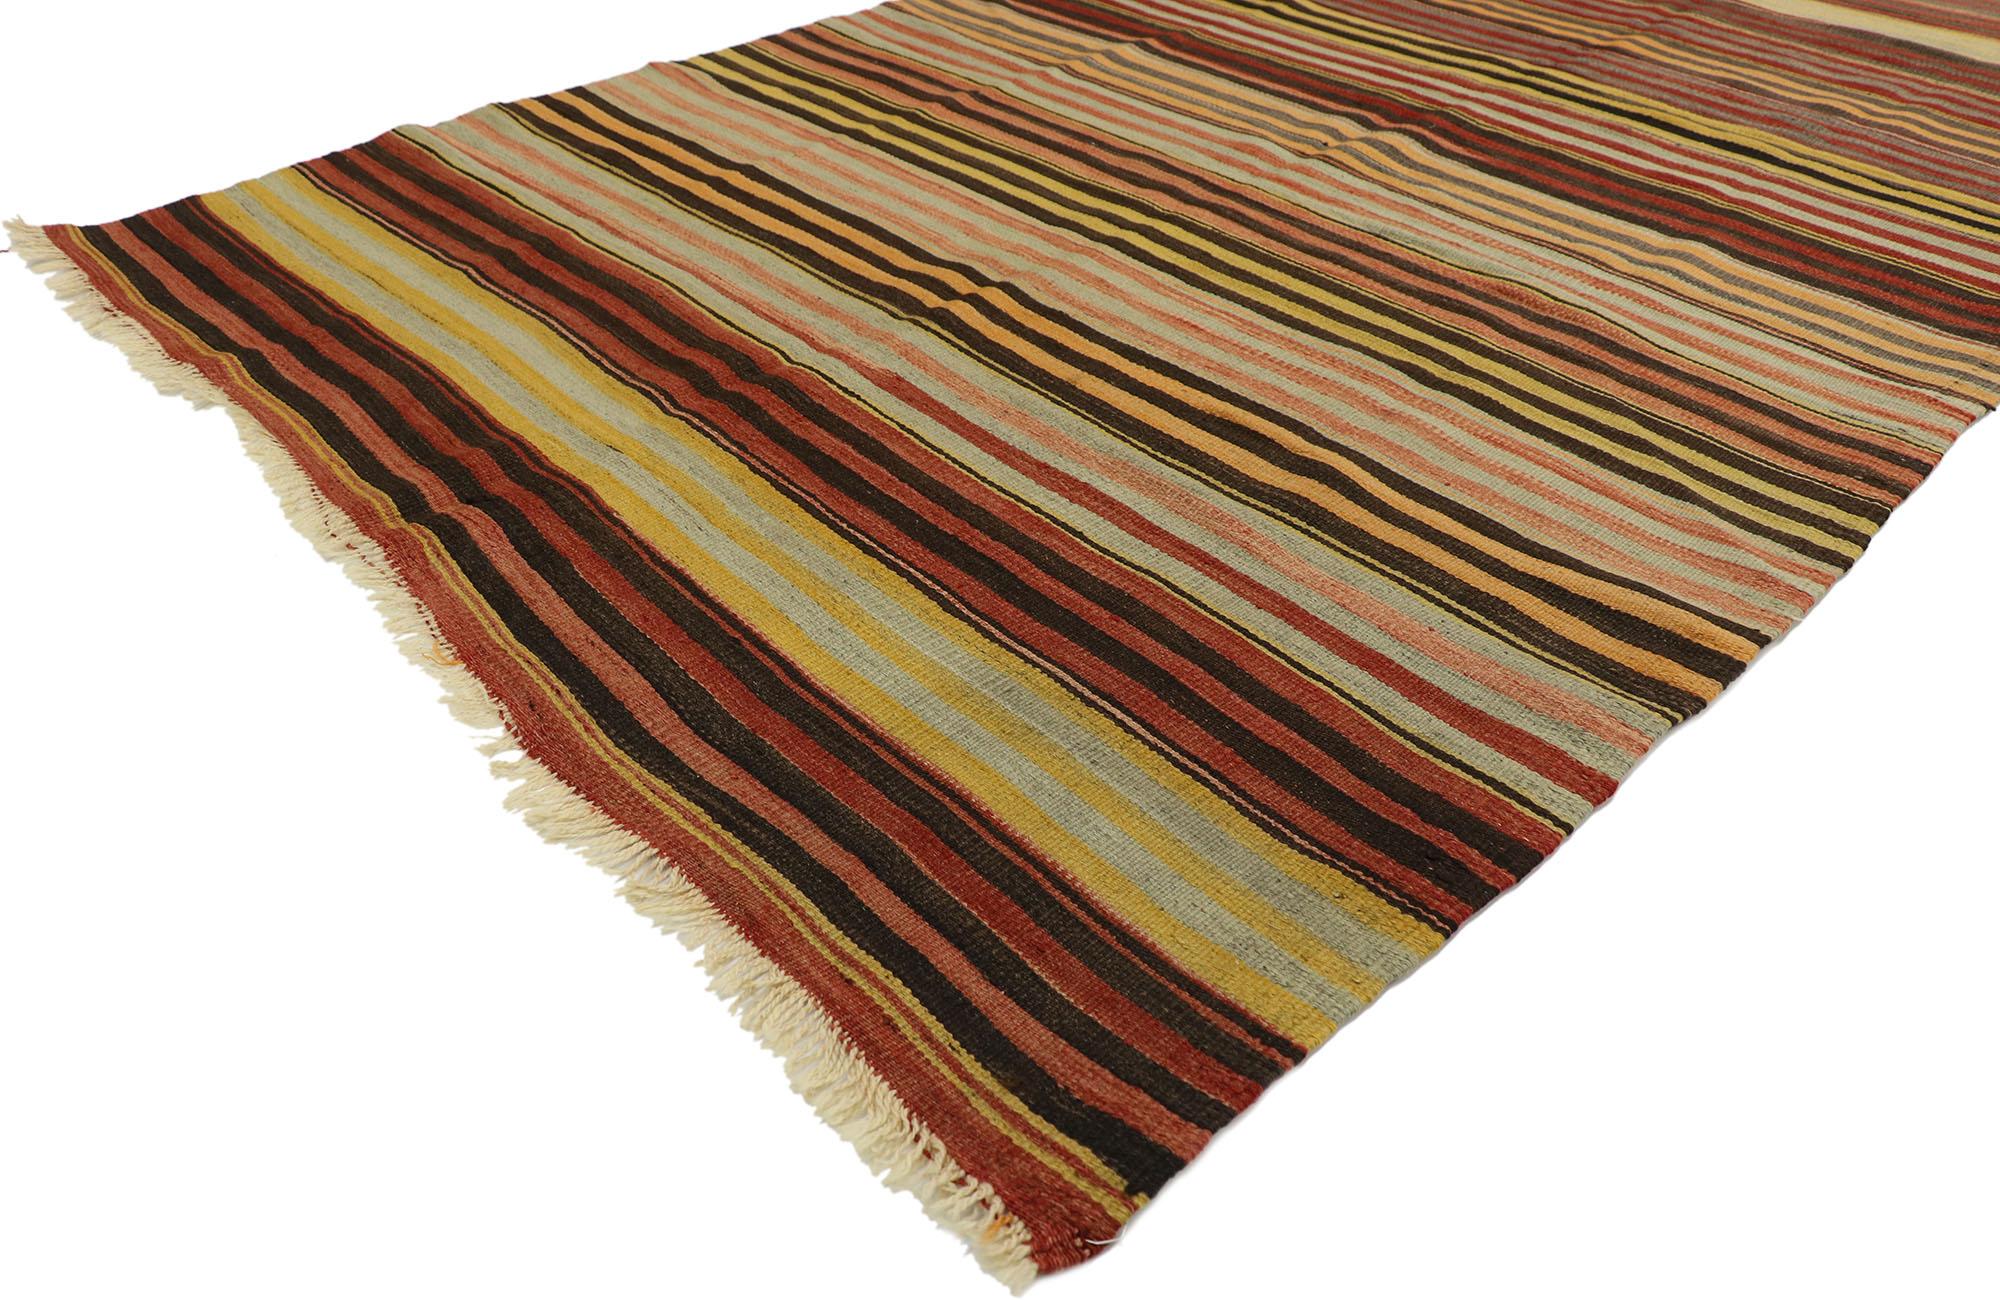 53125, vintage Turkish Striped Kilim rug with Modern Rustic Cabin style. With its warm hues and rugged beauty, this handwoven wool striped Kilim rug manages to meld contemporary, modern, and Traditional Design elements. The flat-weave Kilim rug